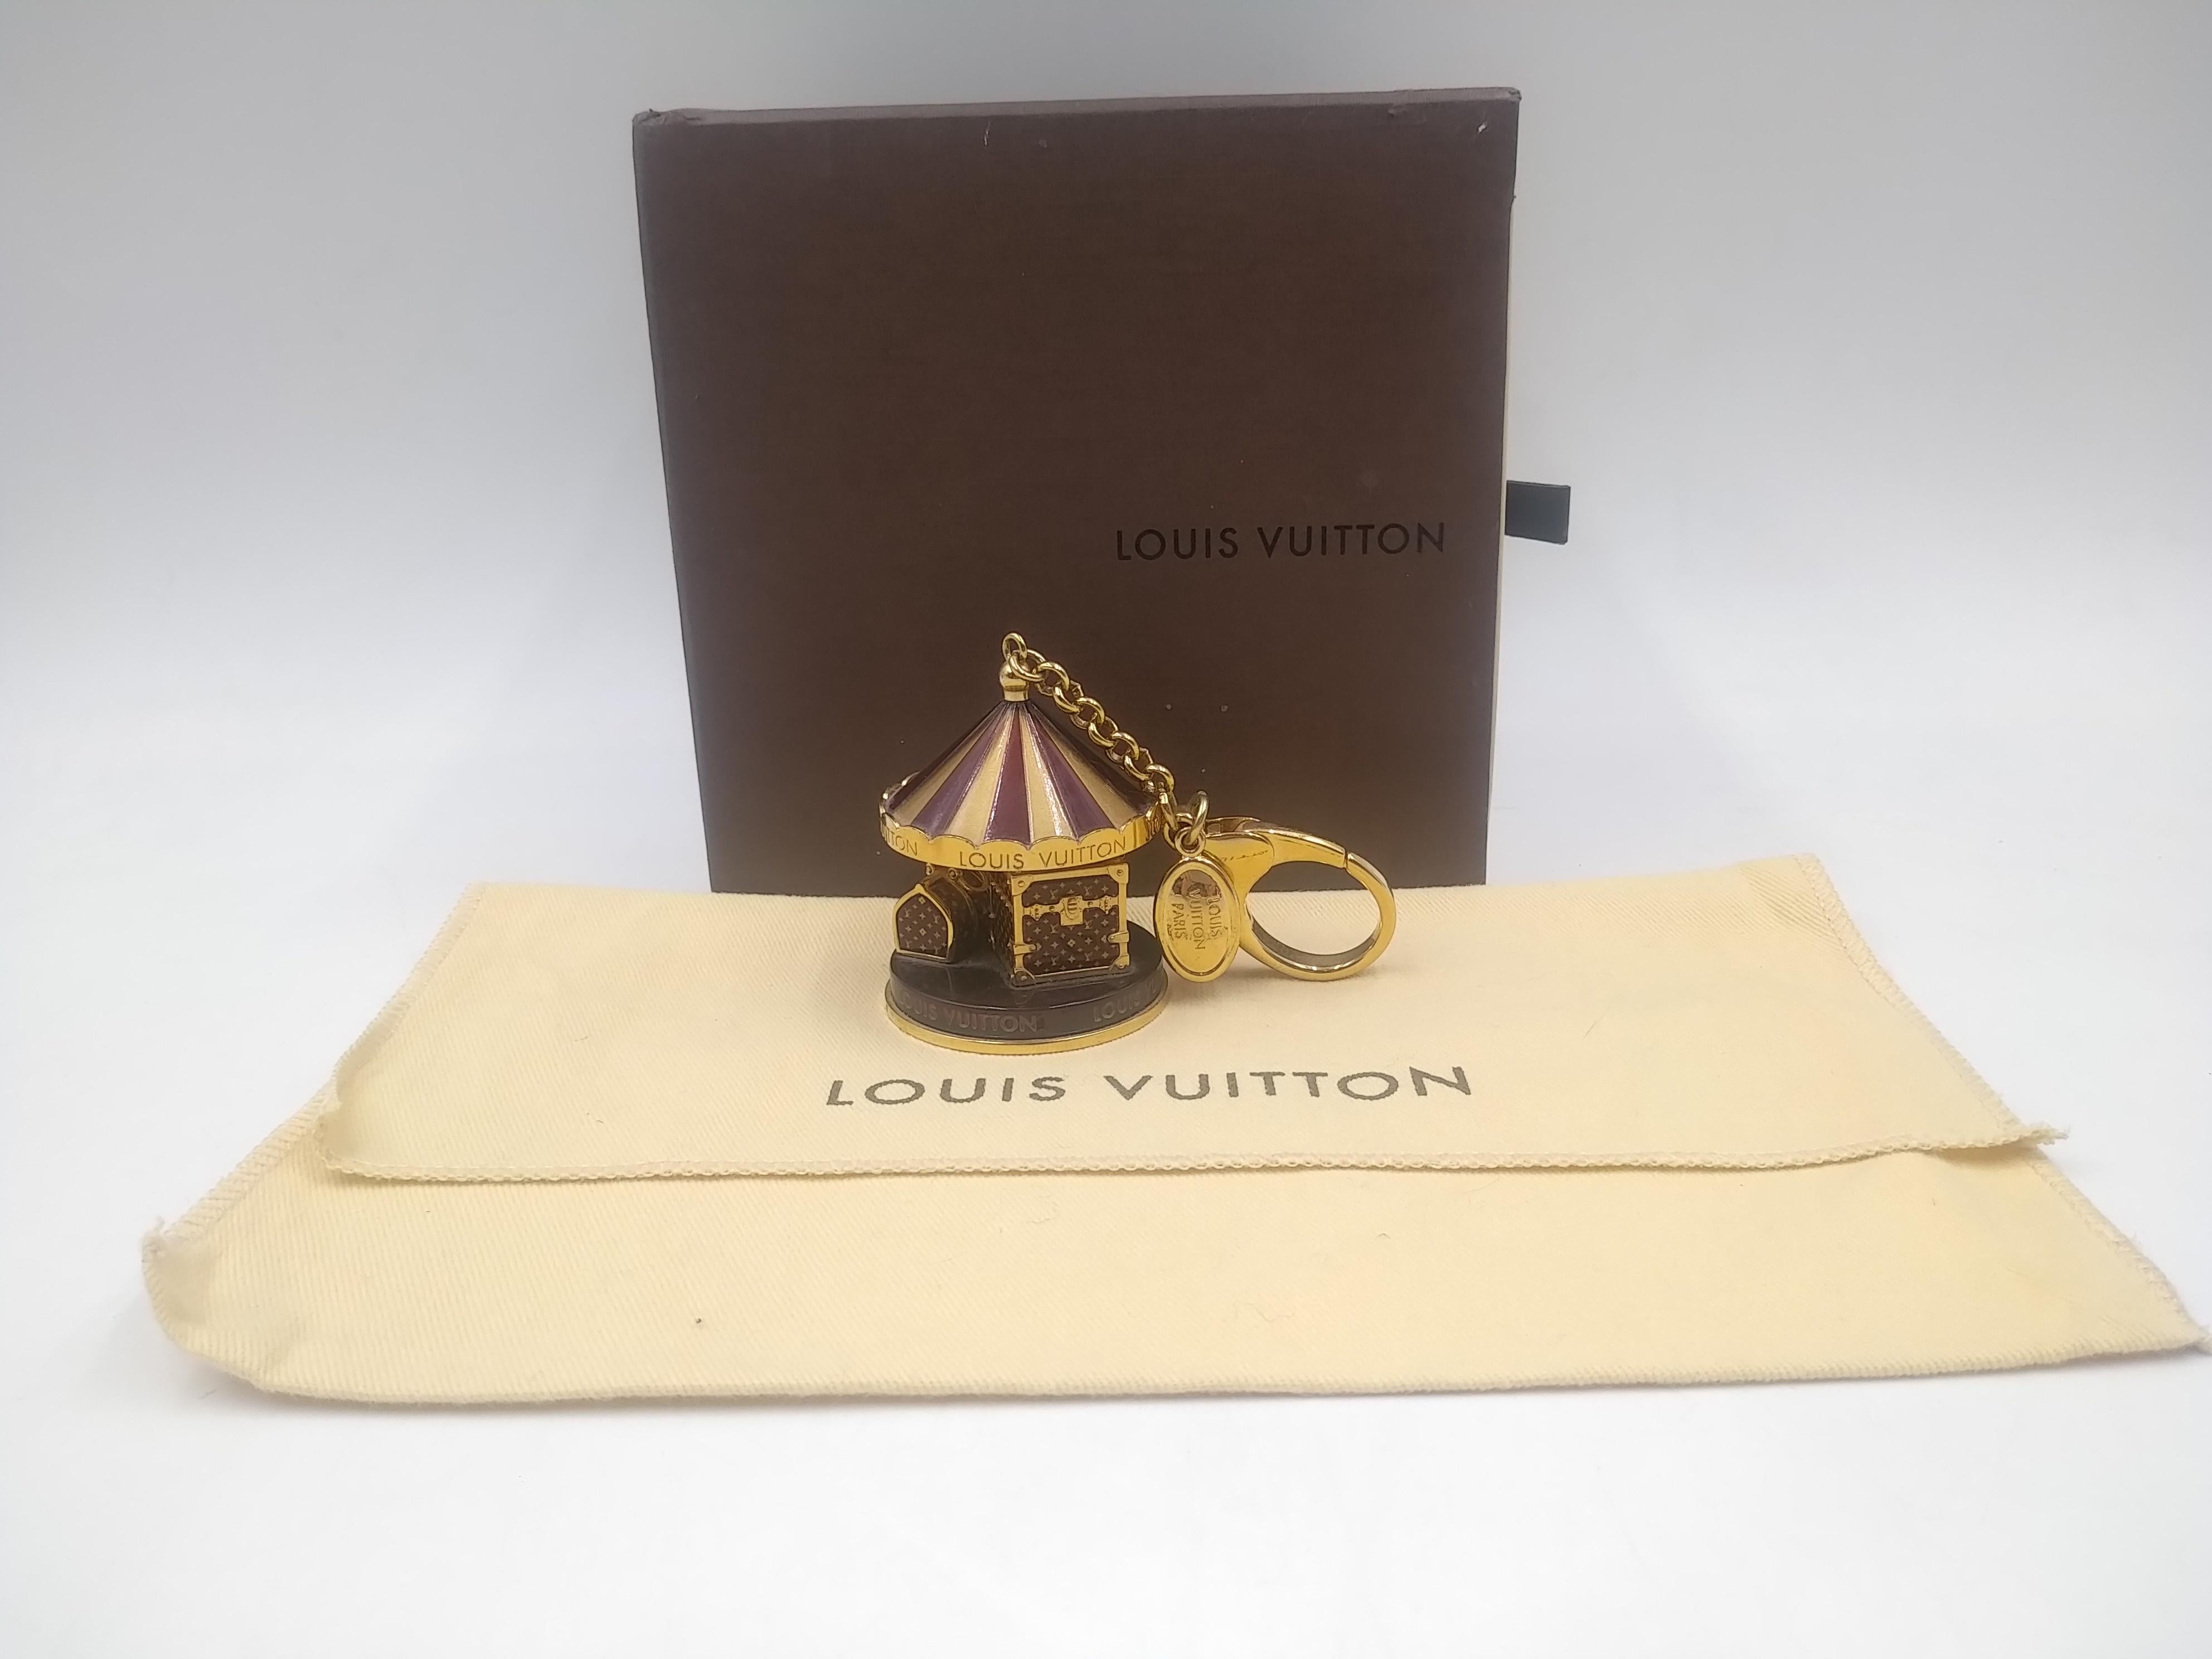 Louis Vuitton Gold/Brown Monogram Carousel Key Chain and Bag Charm For Sale 10